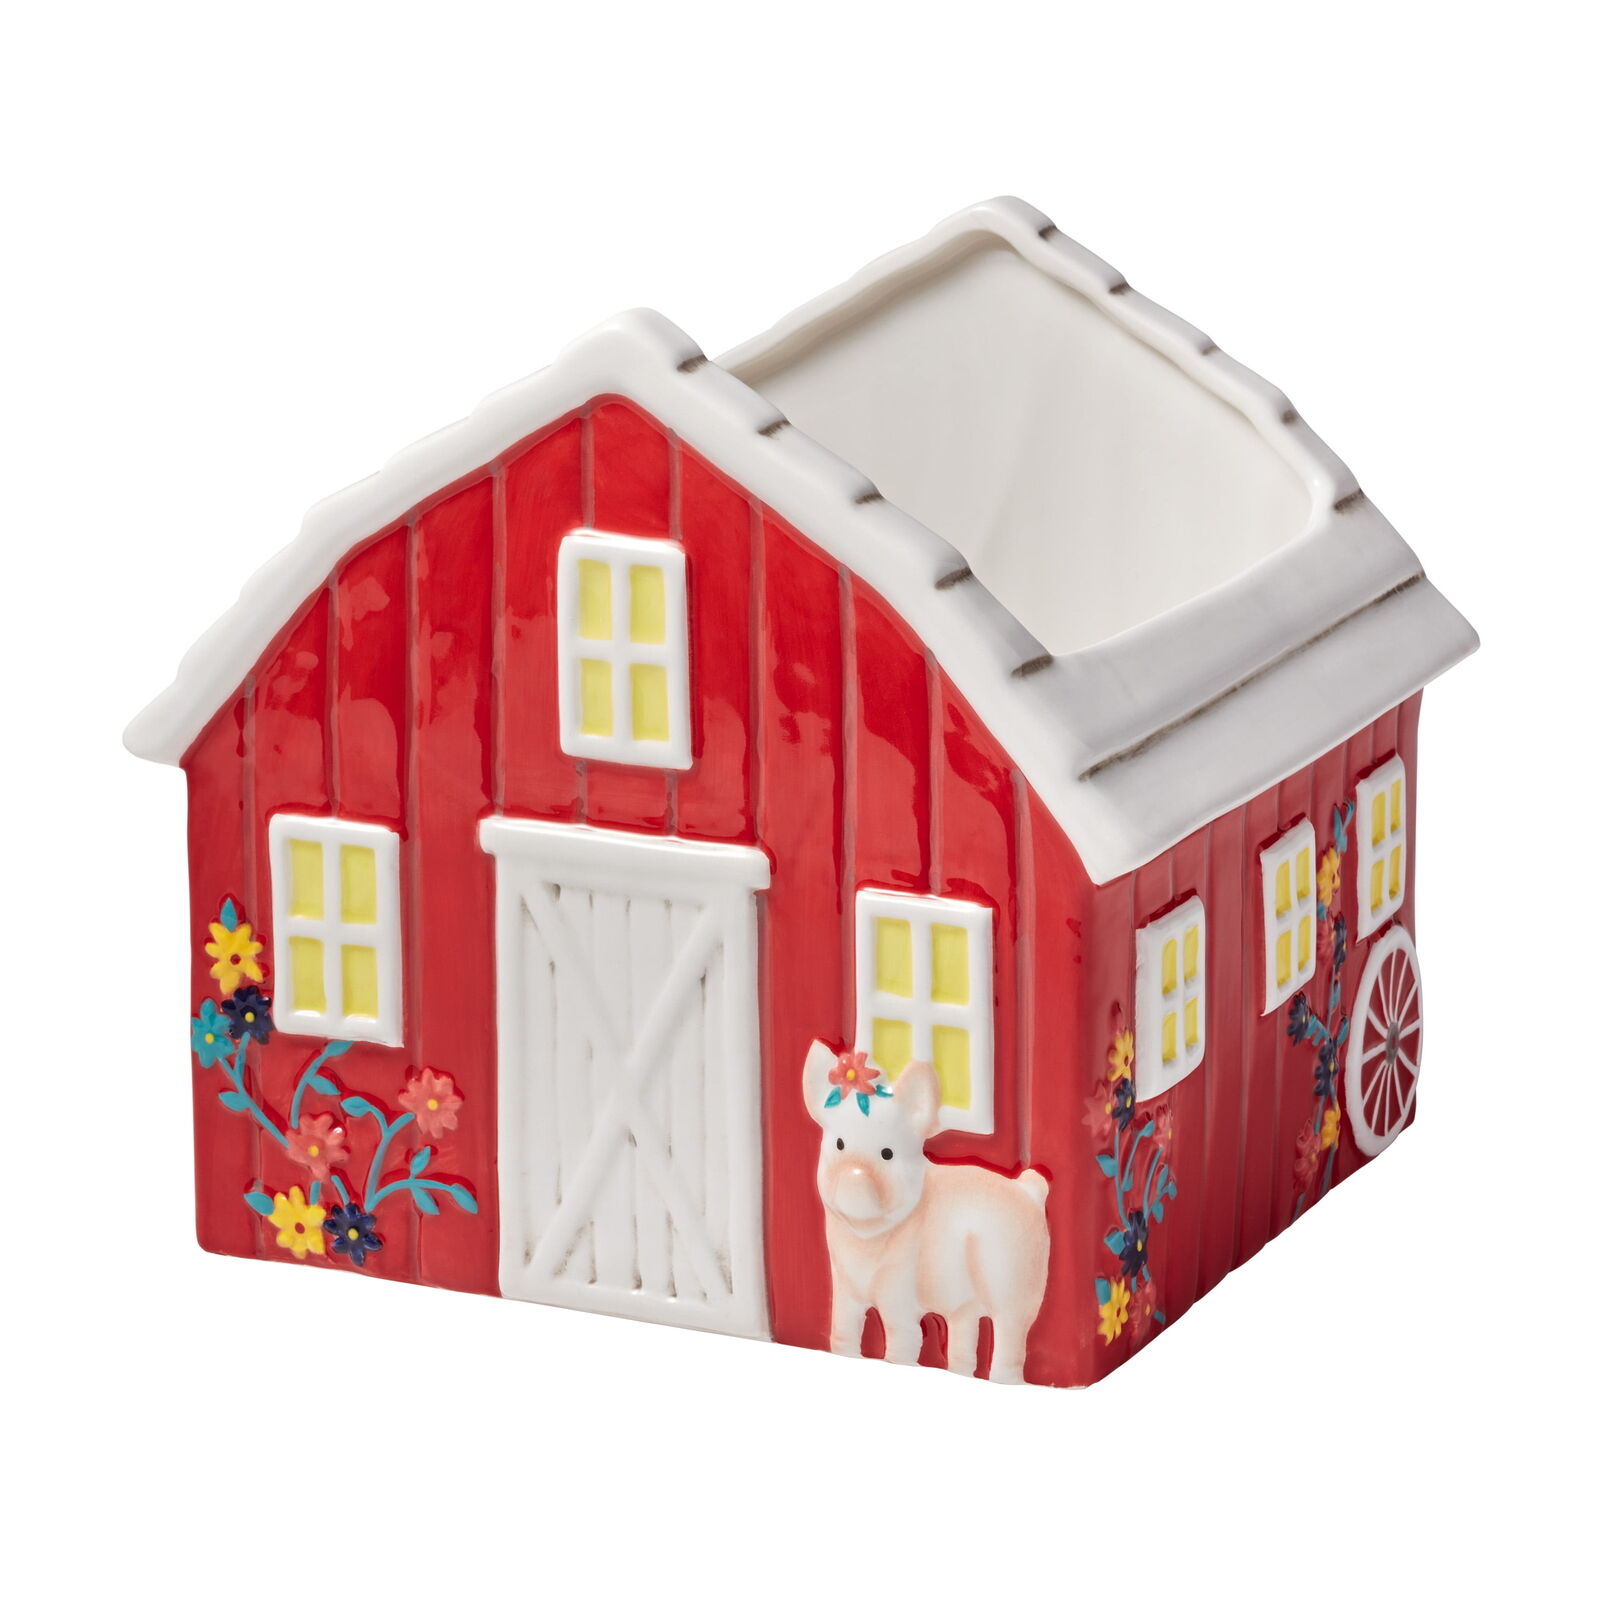 The Pioneer Woman Red Barn Ceramic Planter